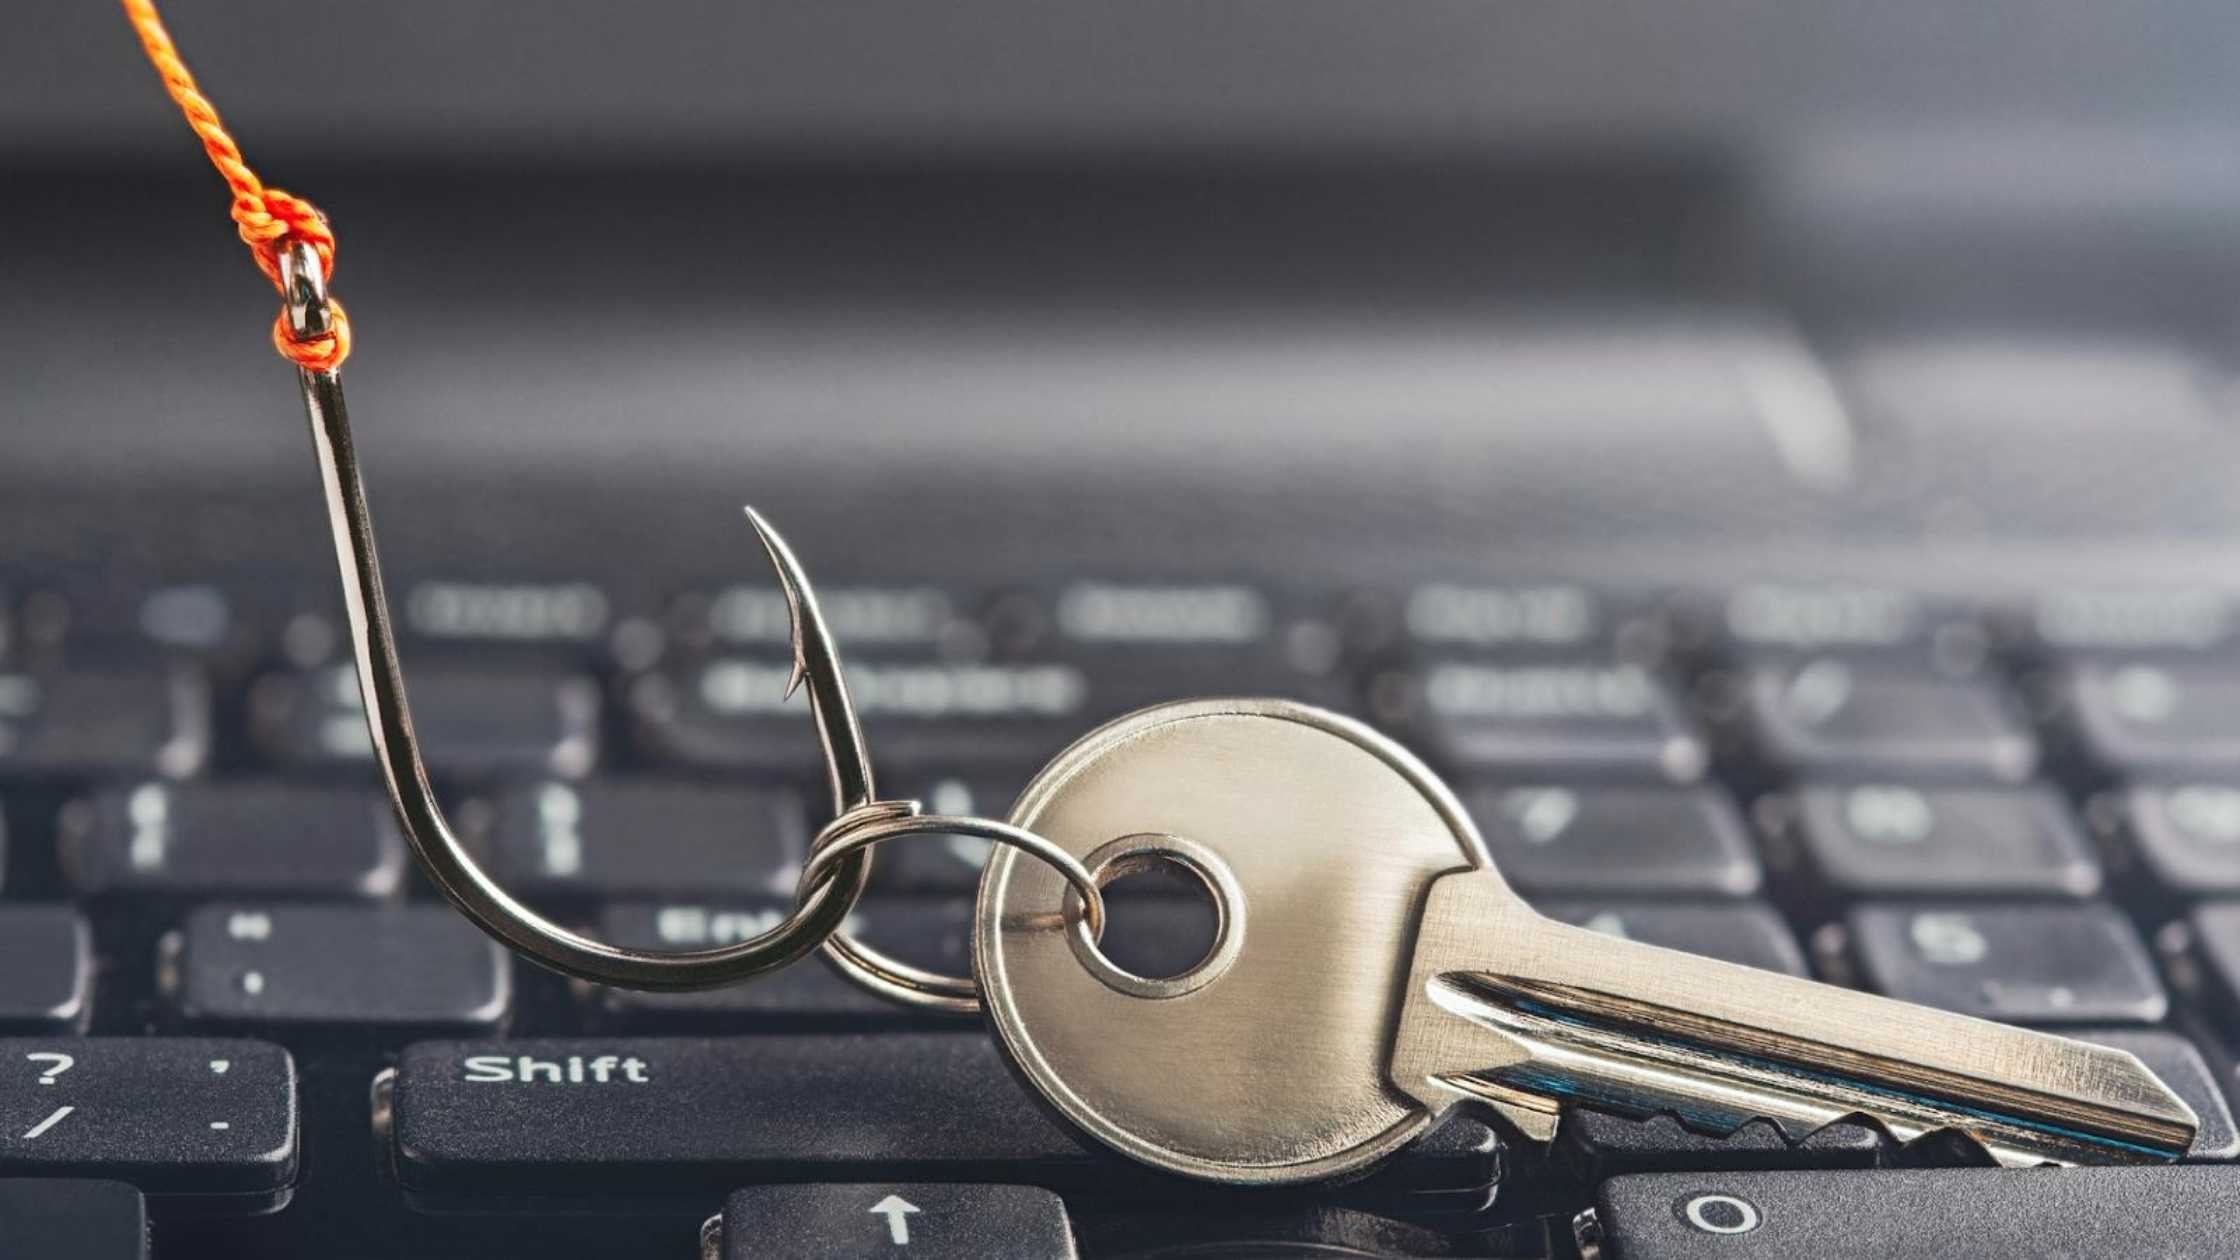 Phishing concept; Key on a fishing hook over a computer keyboard